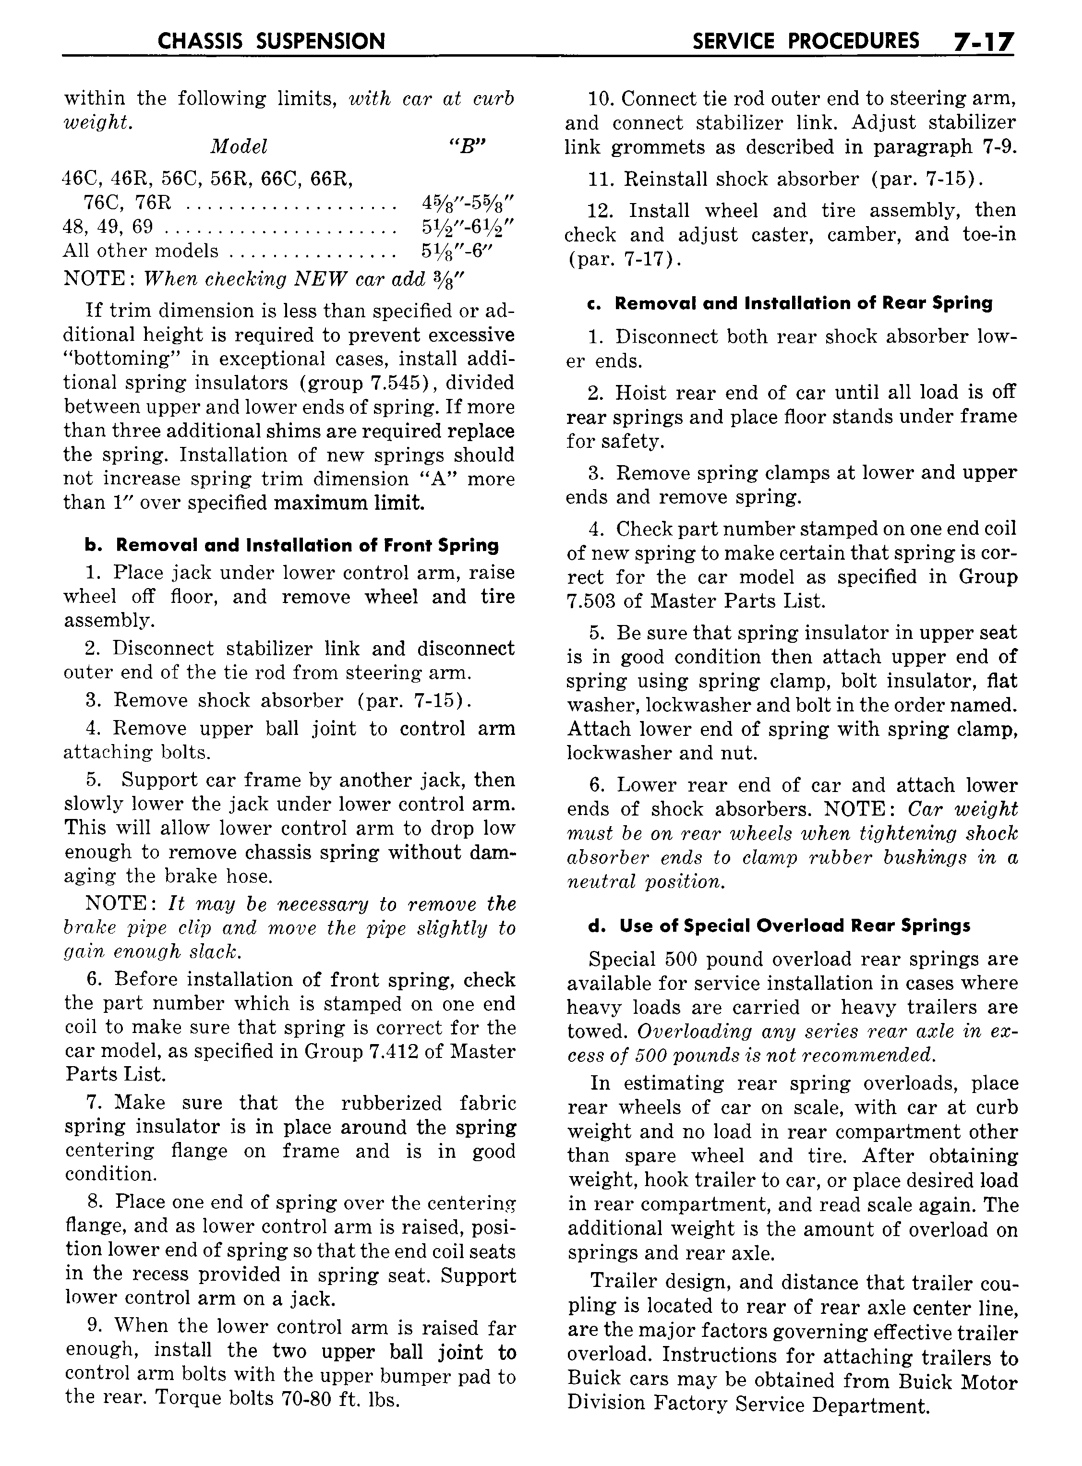 n_08 1957 Buick Shop Manual - Chassis Suspension-017-017.jpg